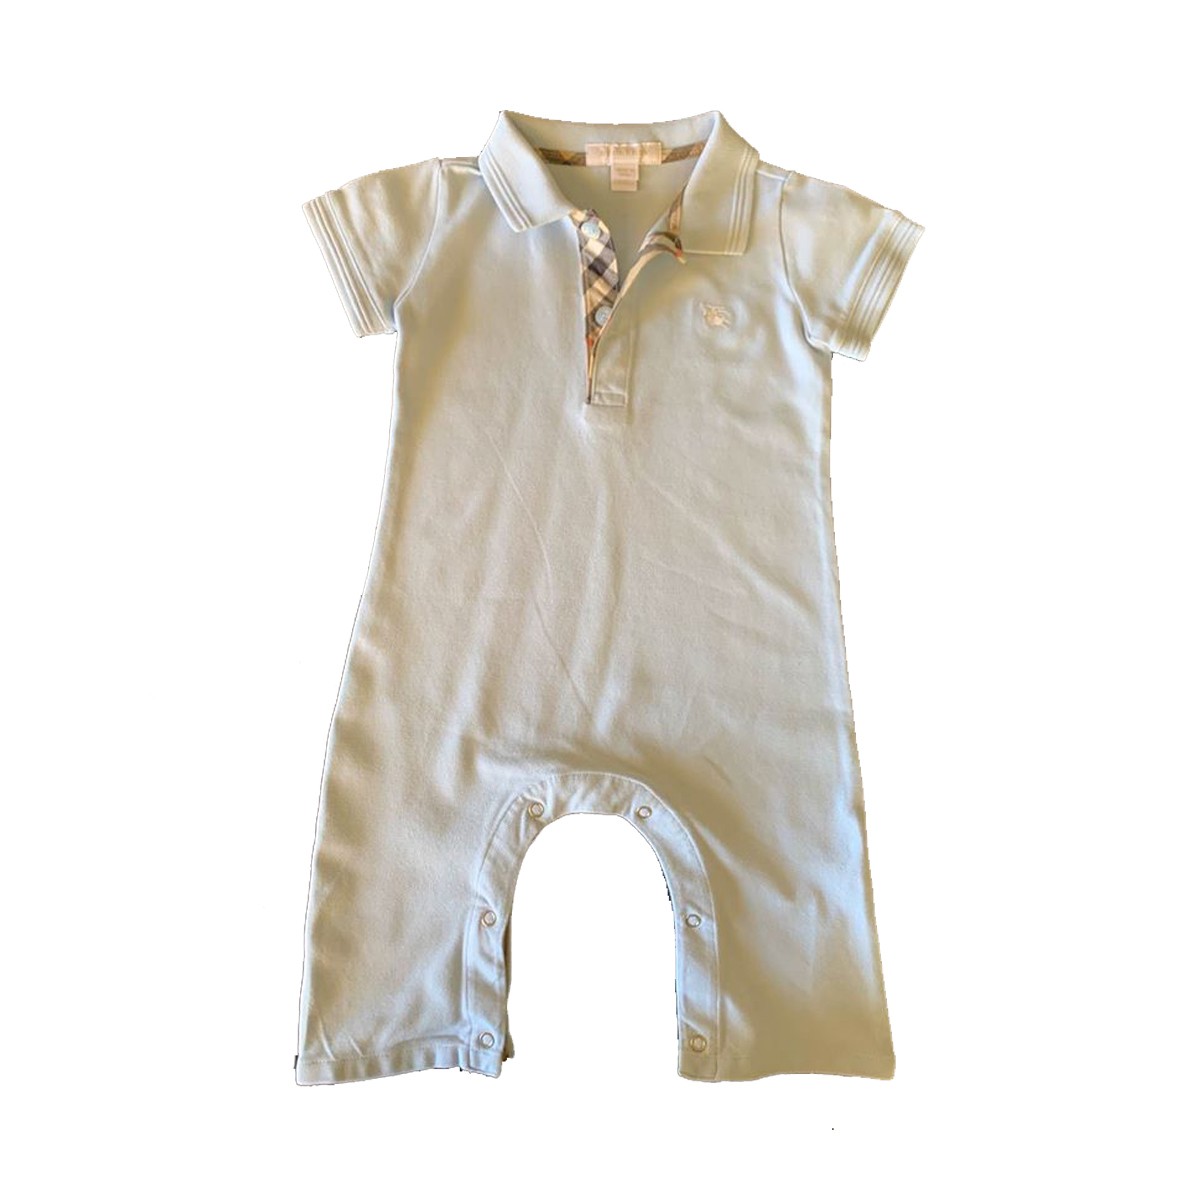 Burberry baby overall suit size 12M 